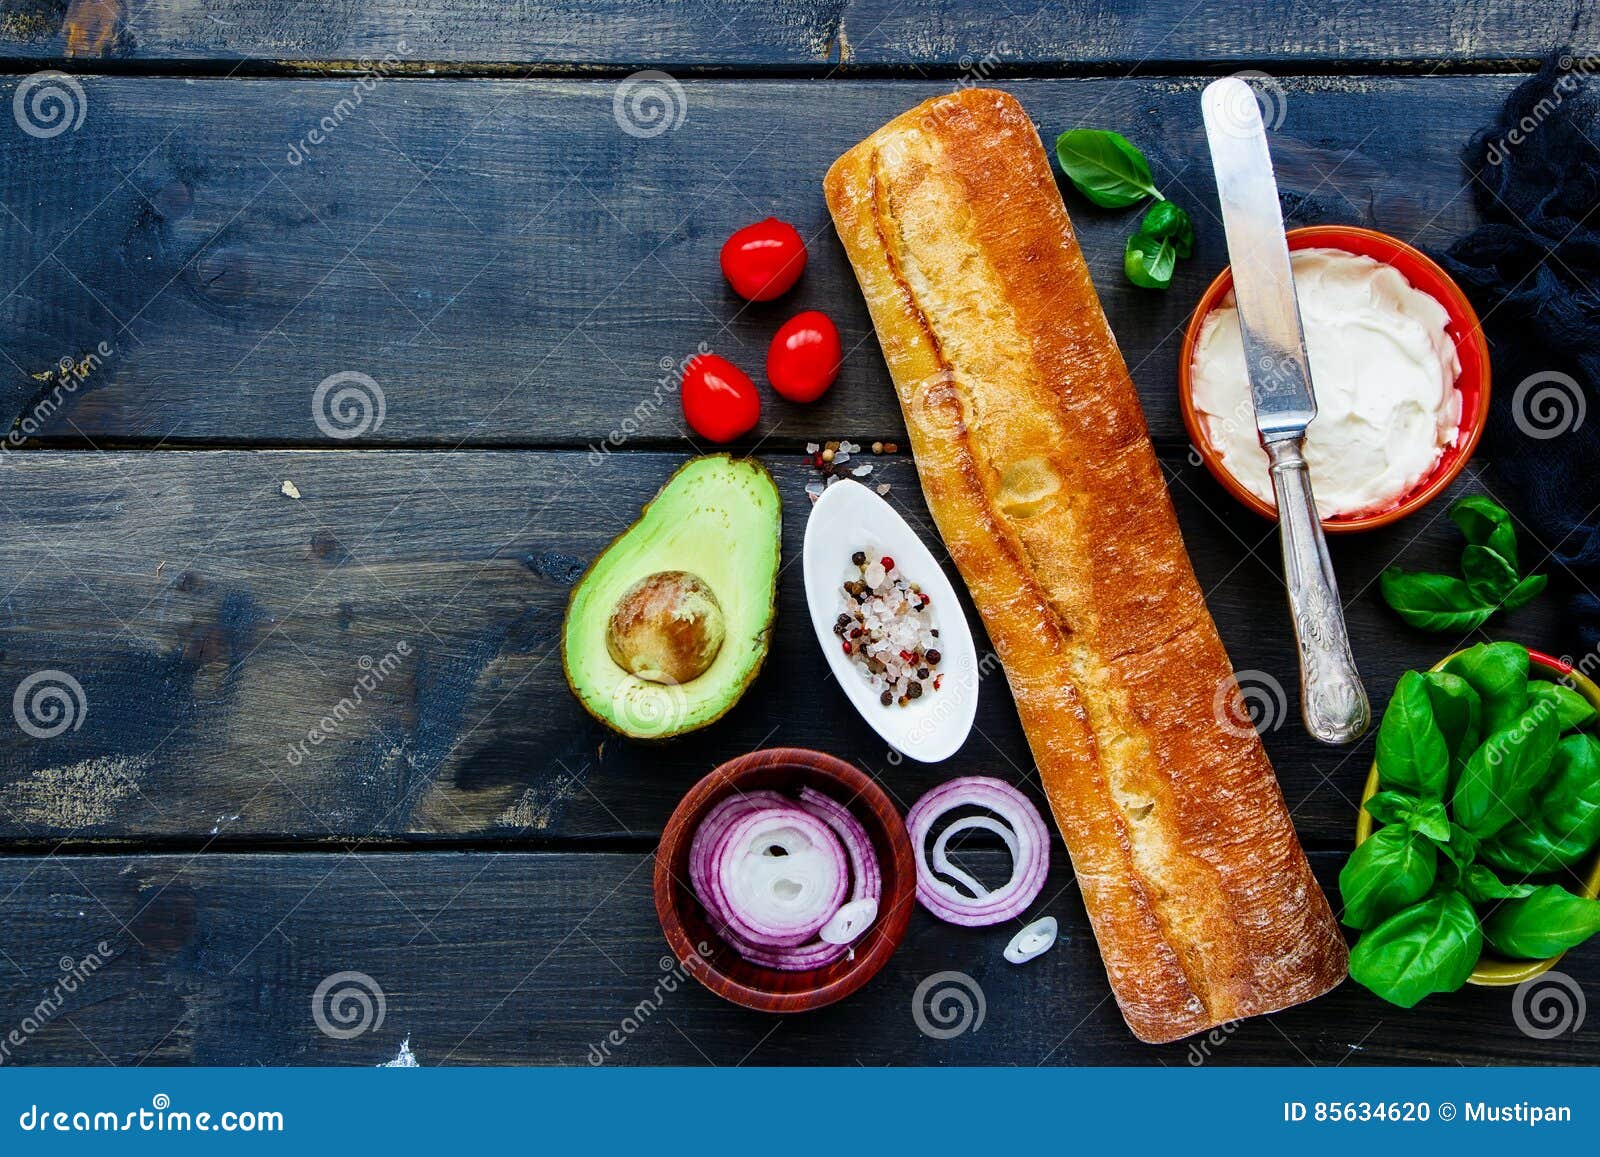 Ingredients for Making Sandwiches Stock Photo - Image of clean, herbs